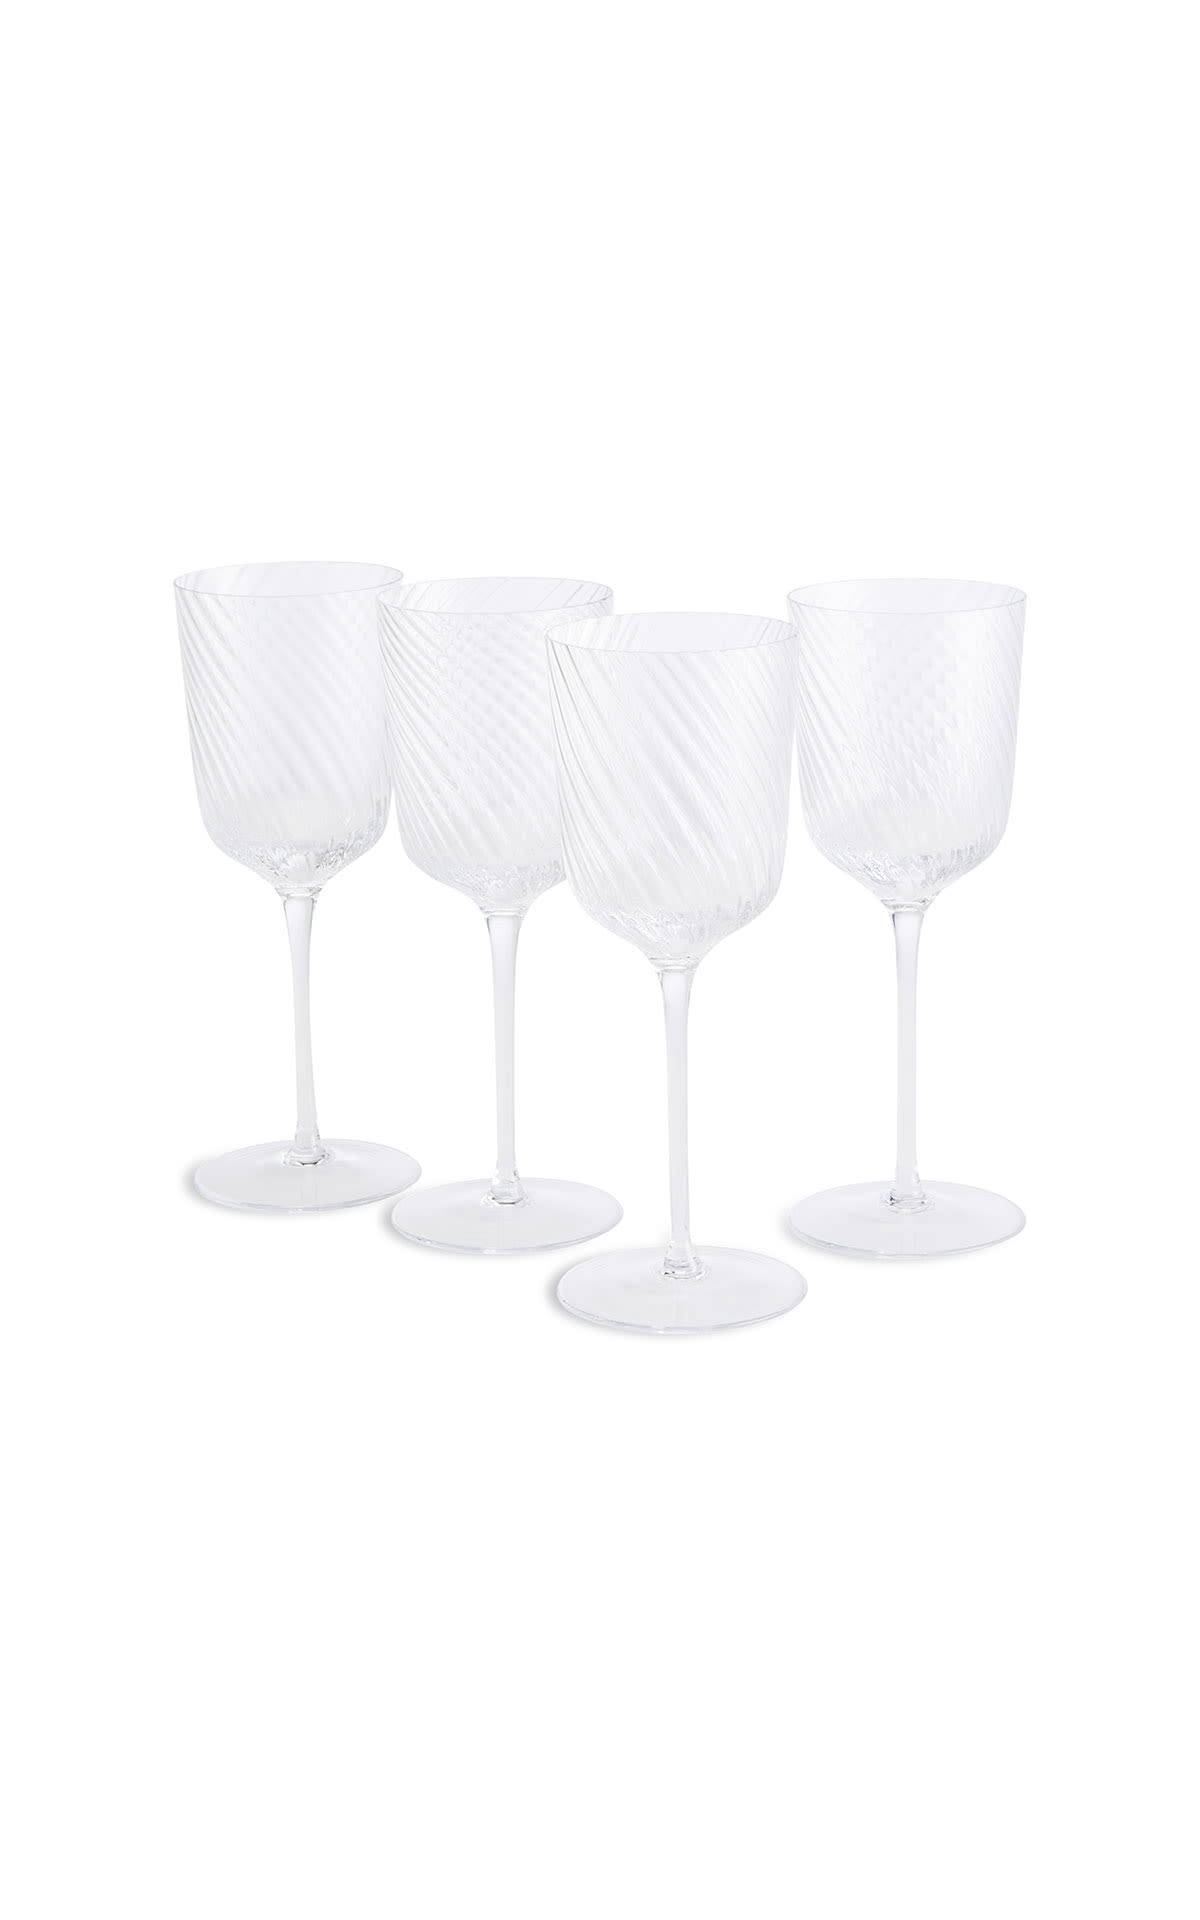 Soho Home Brimbscome white wine glass (set of 4) from Bicester Village